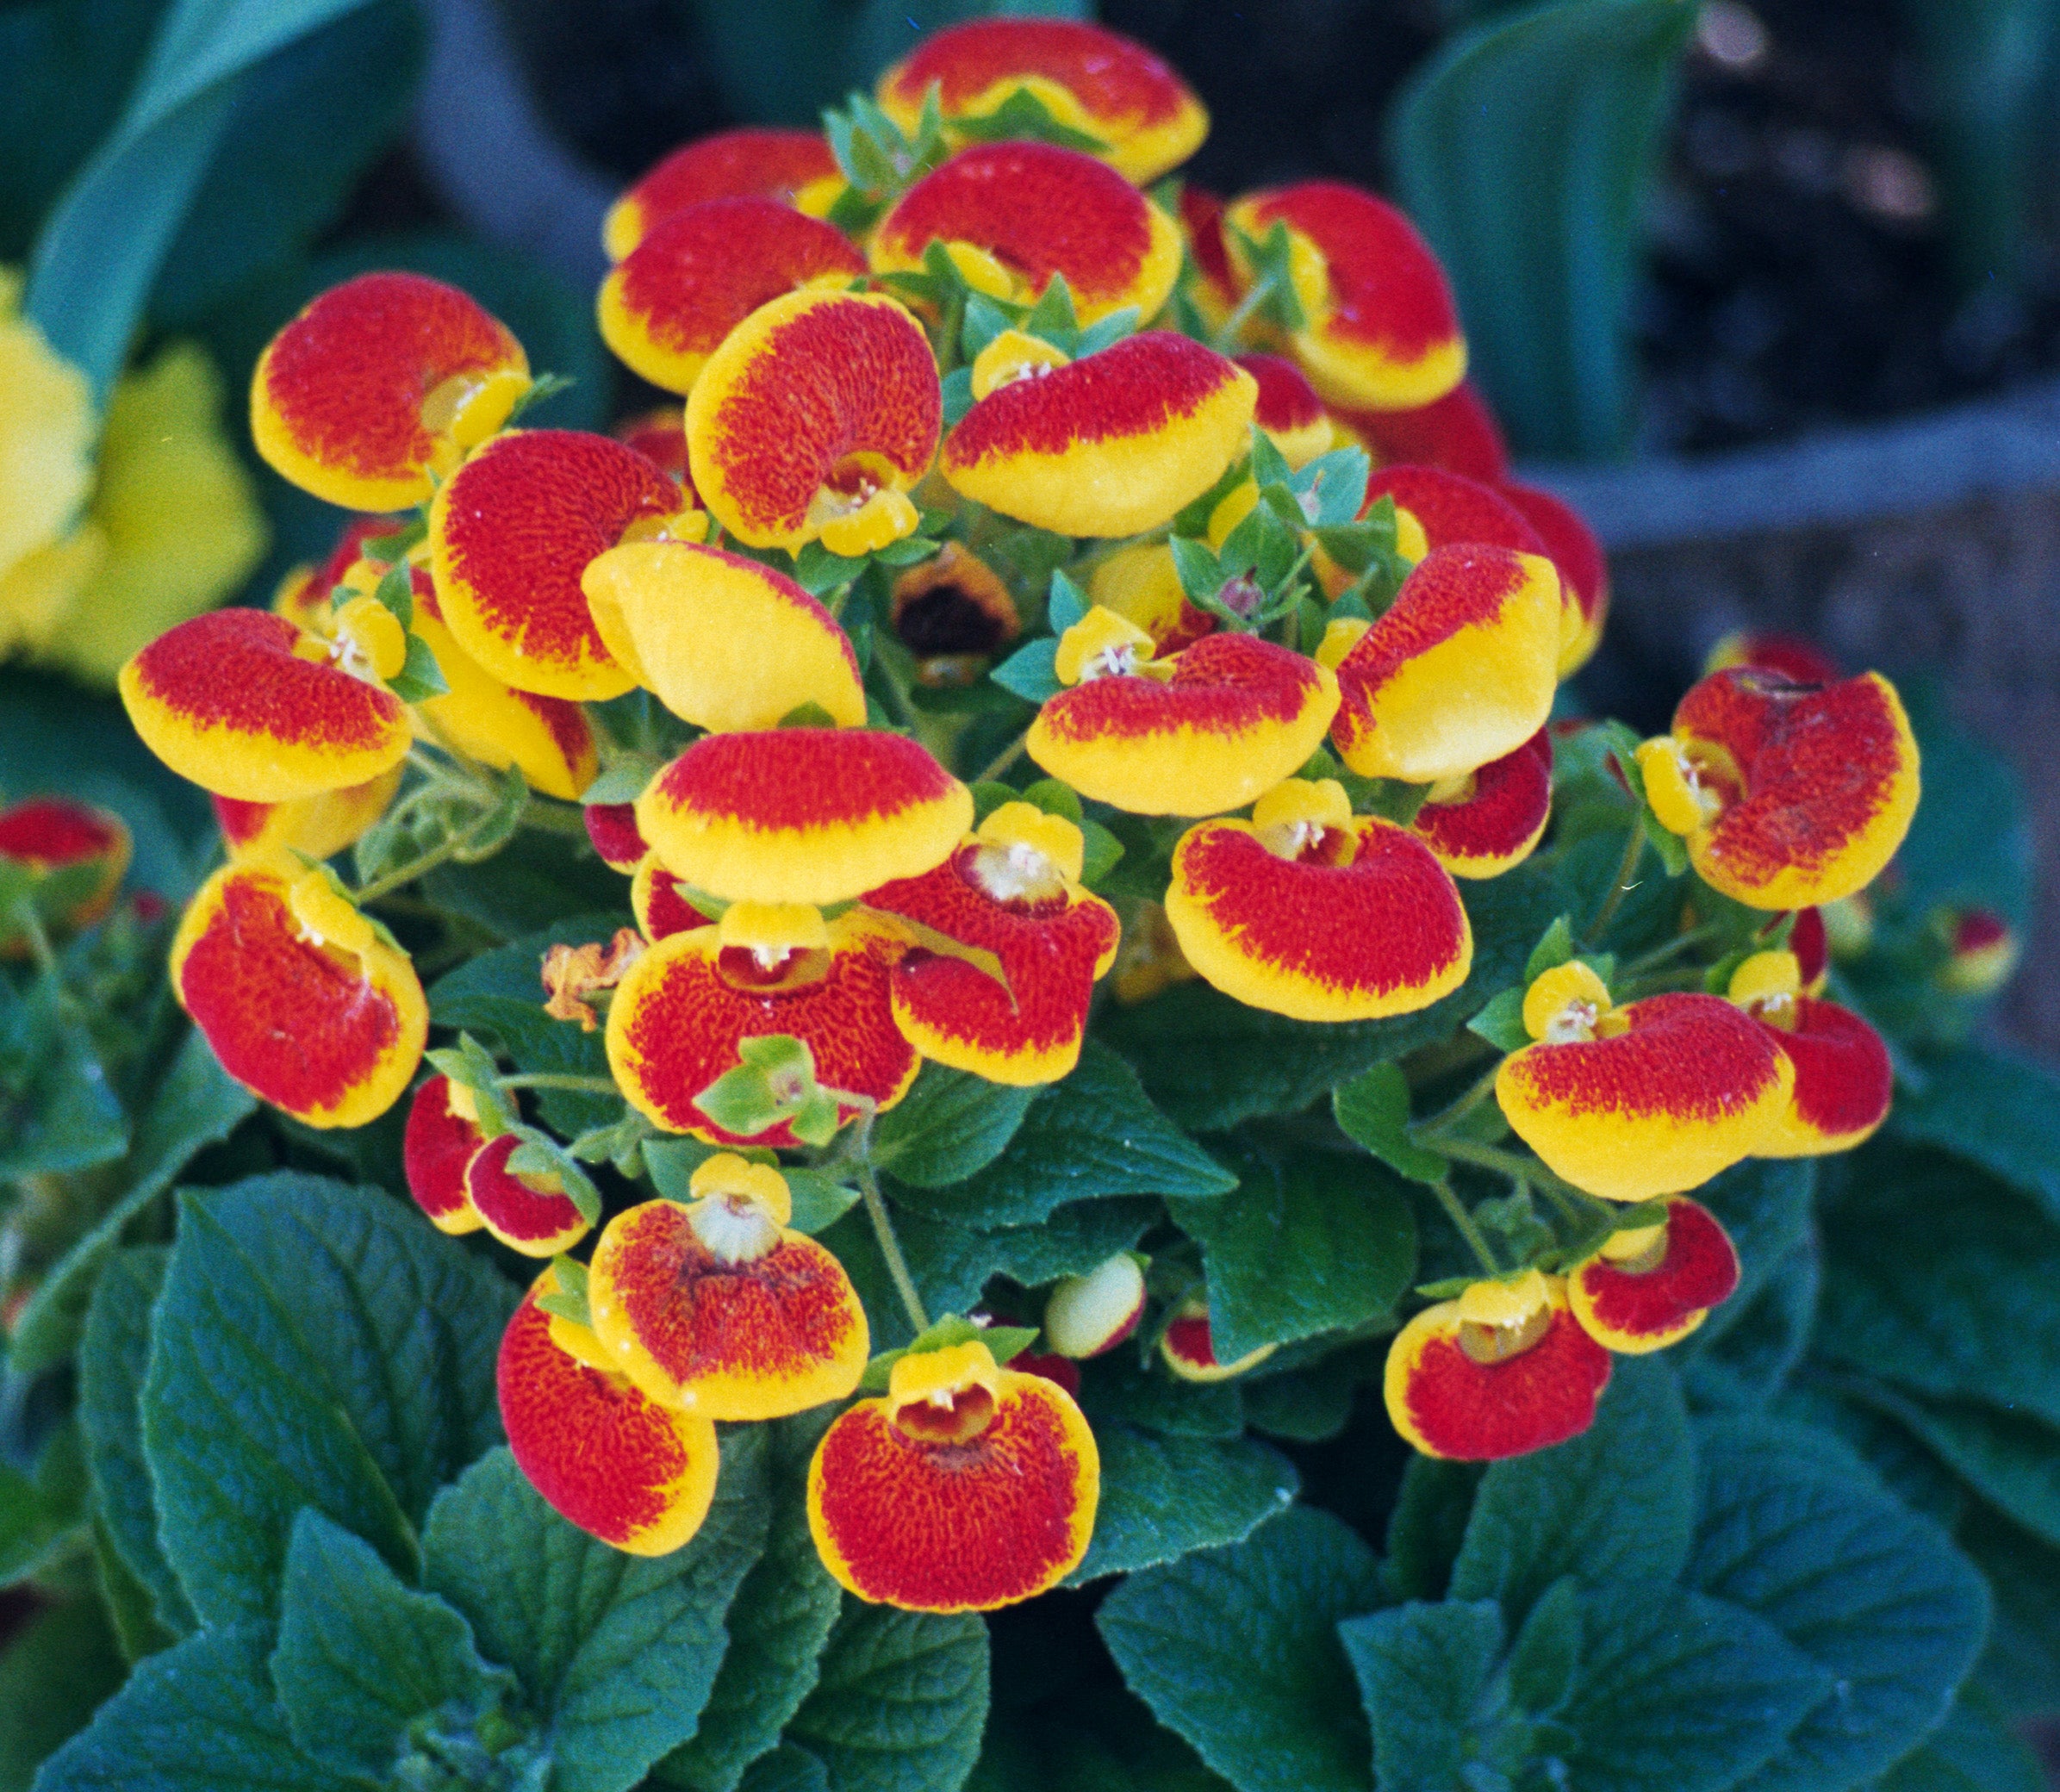 Red Yellow Calceolaria Ladys Purse Flowers Stock Photo 613008494 |  Shutterstock